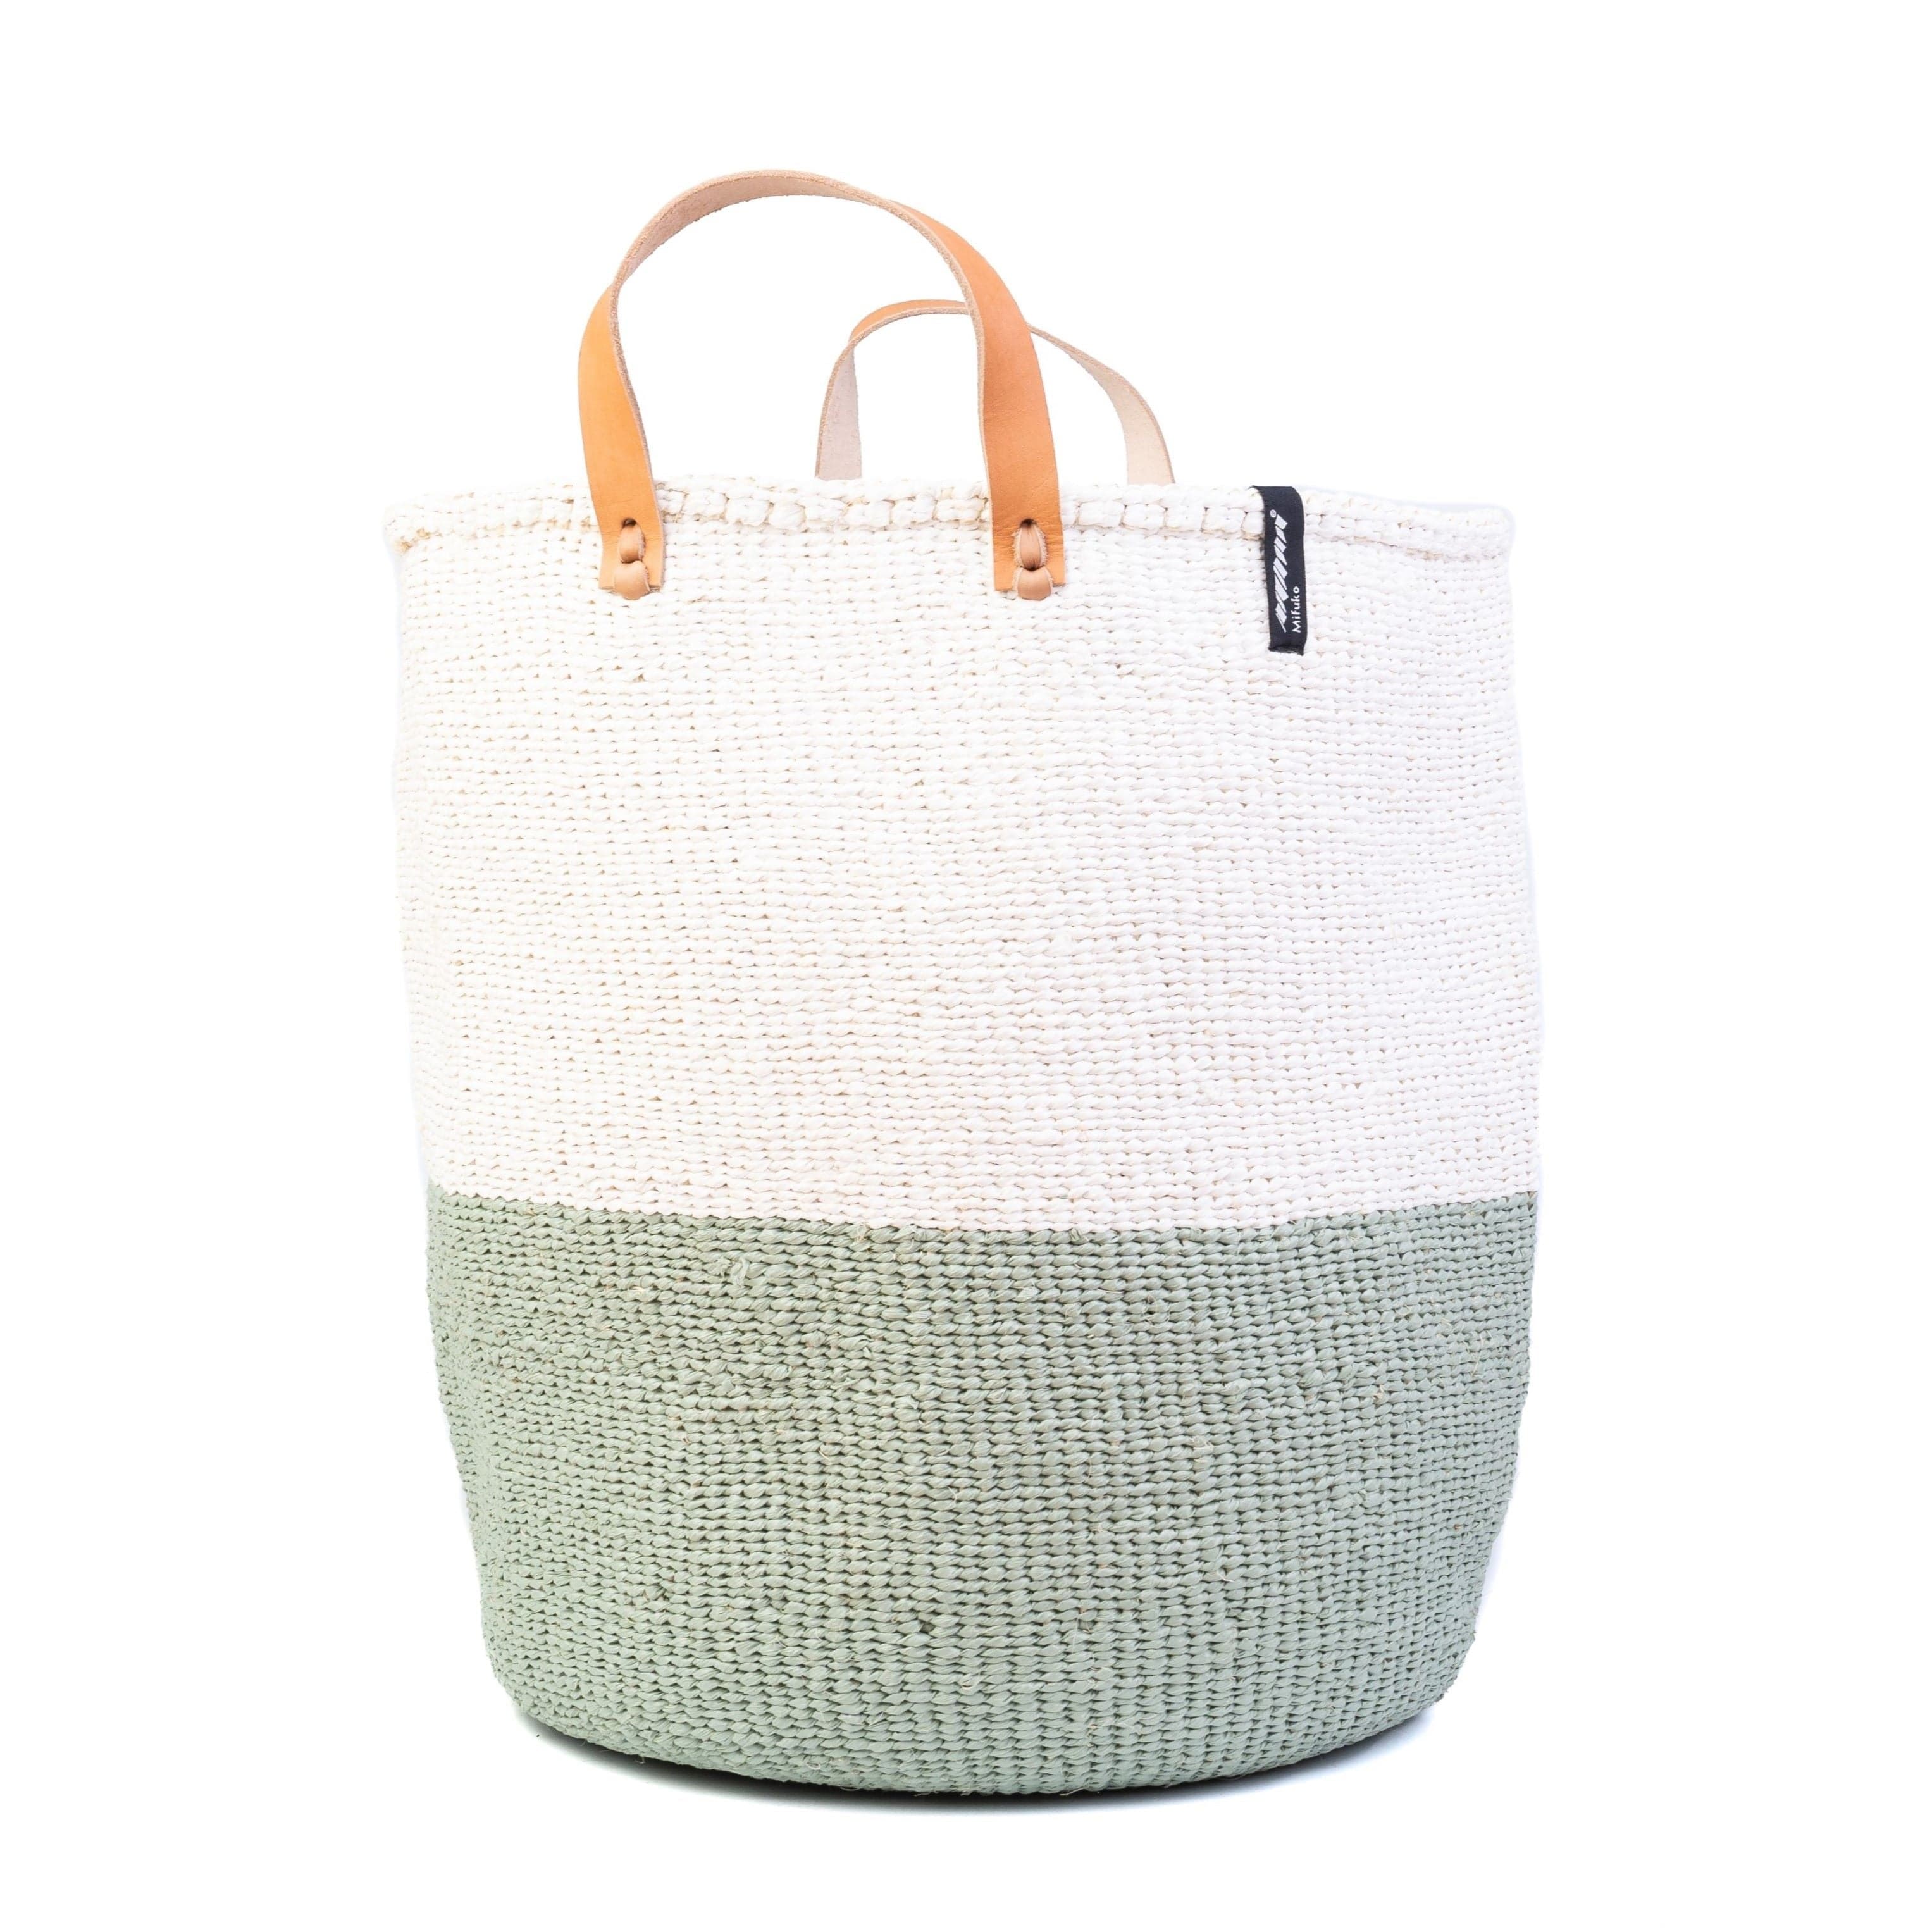 Mifuko Partly recycled plastic and sisal Market basket L Kiondo market basket | White and light green duo L